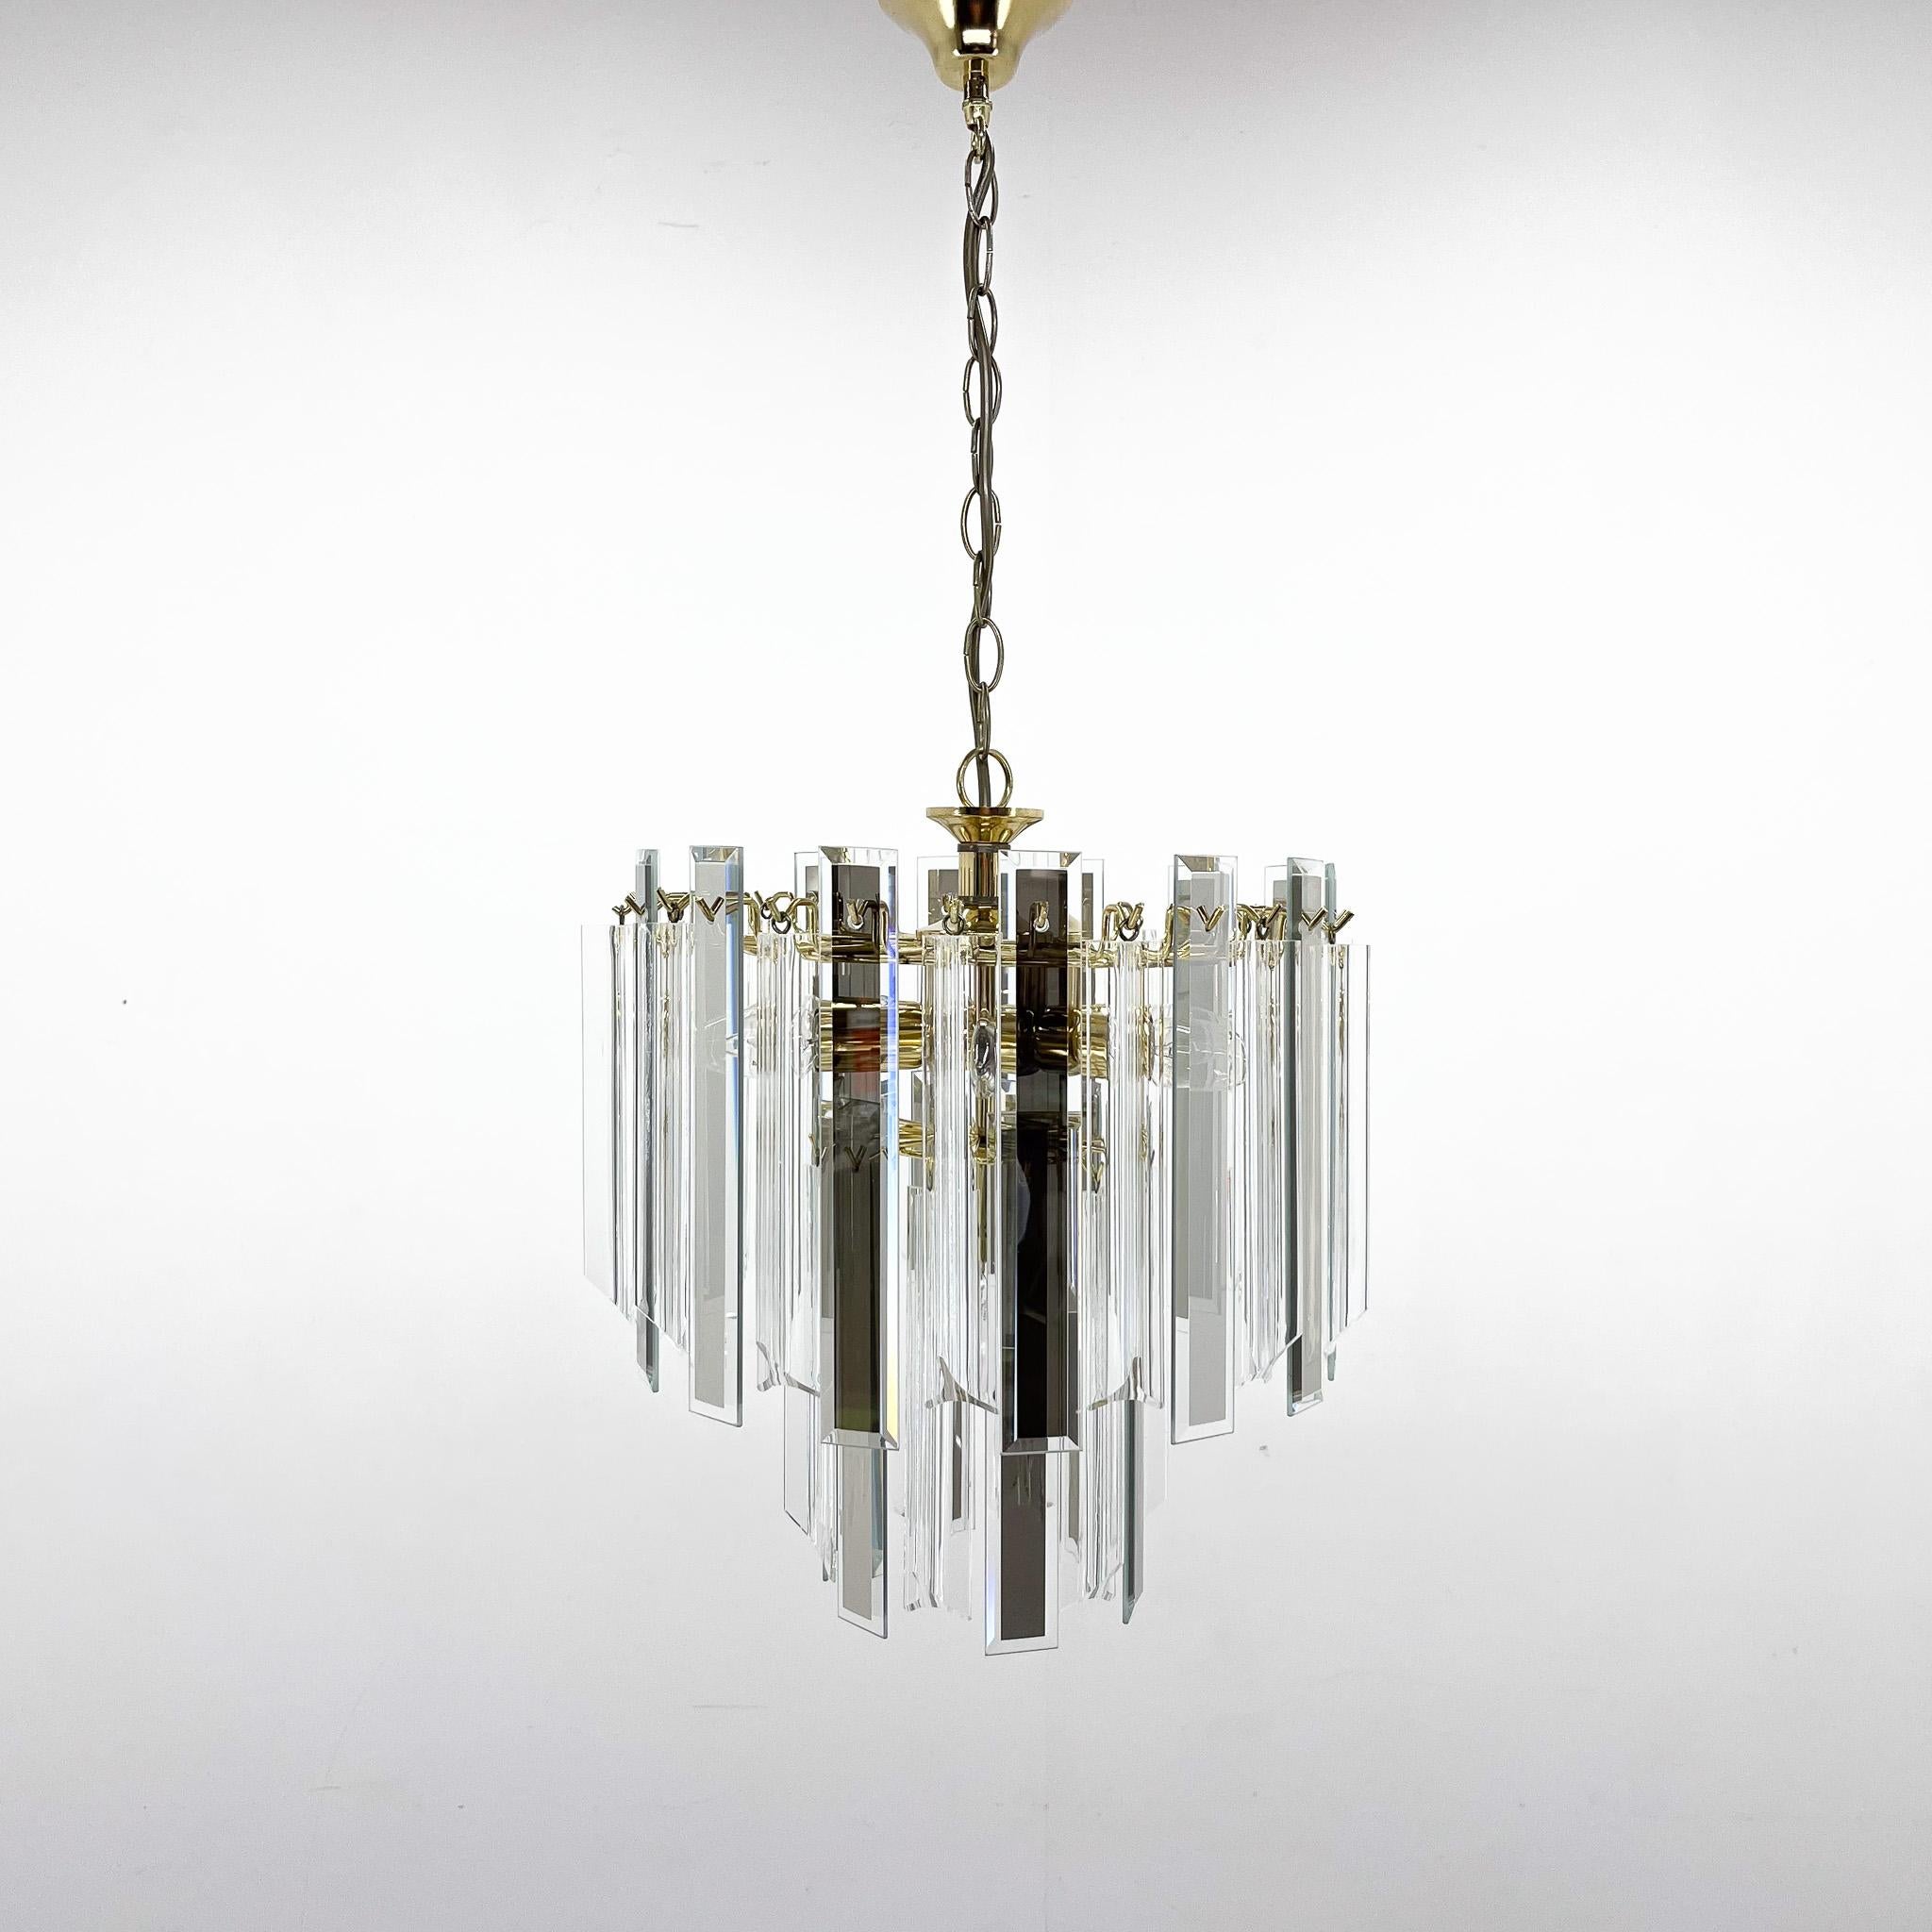 Midcentury Brass, Glass and Lucite Chandelier, Austria 1970s For Sale 7